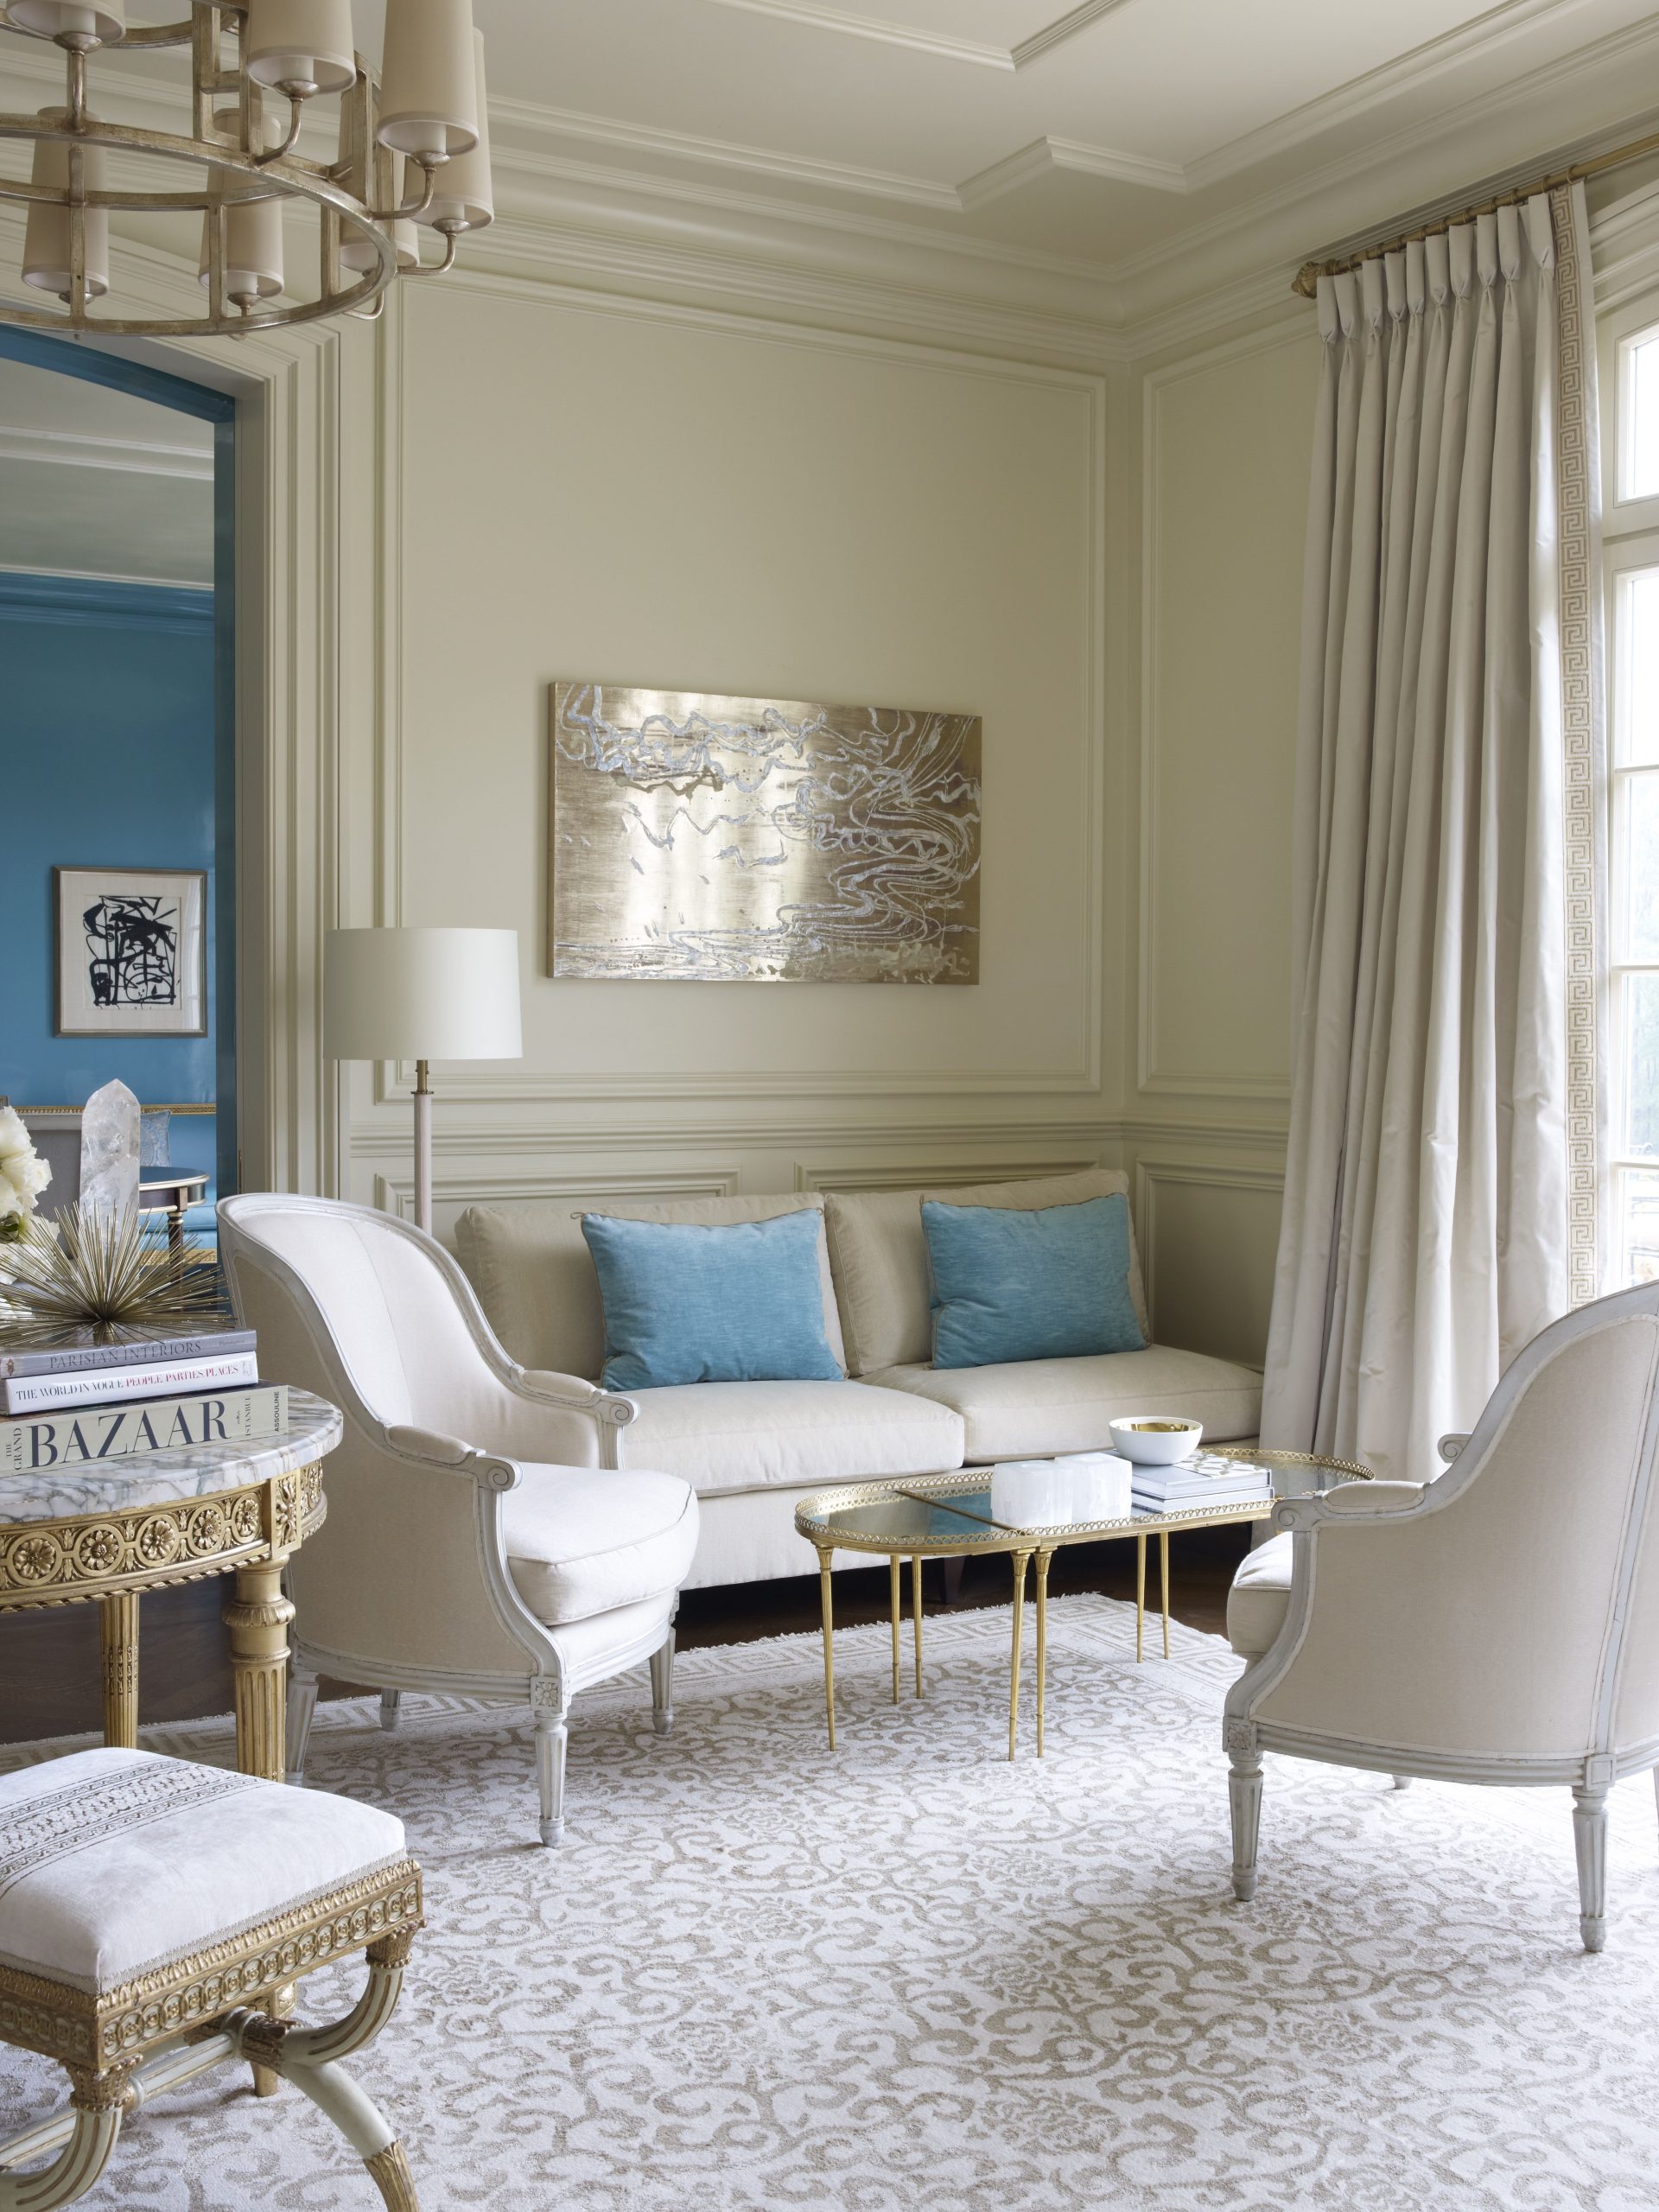 All About Accents: Adding Pops Of Color To Neutral Spaces